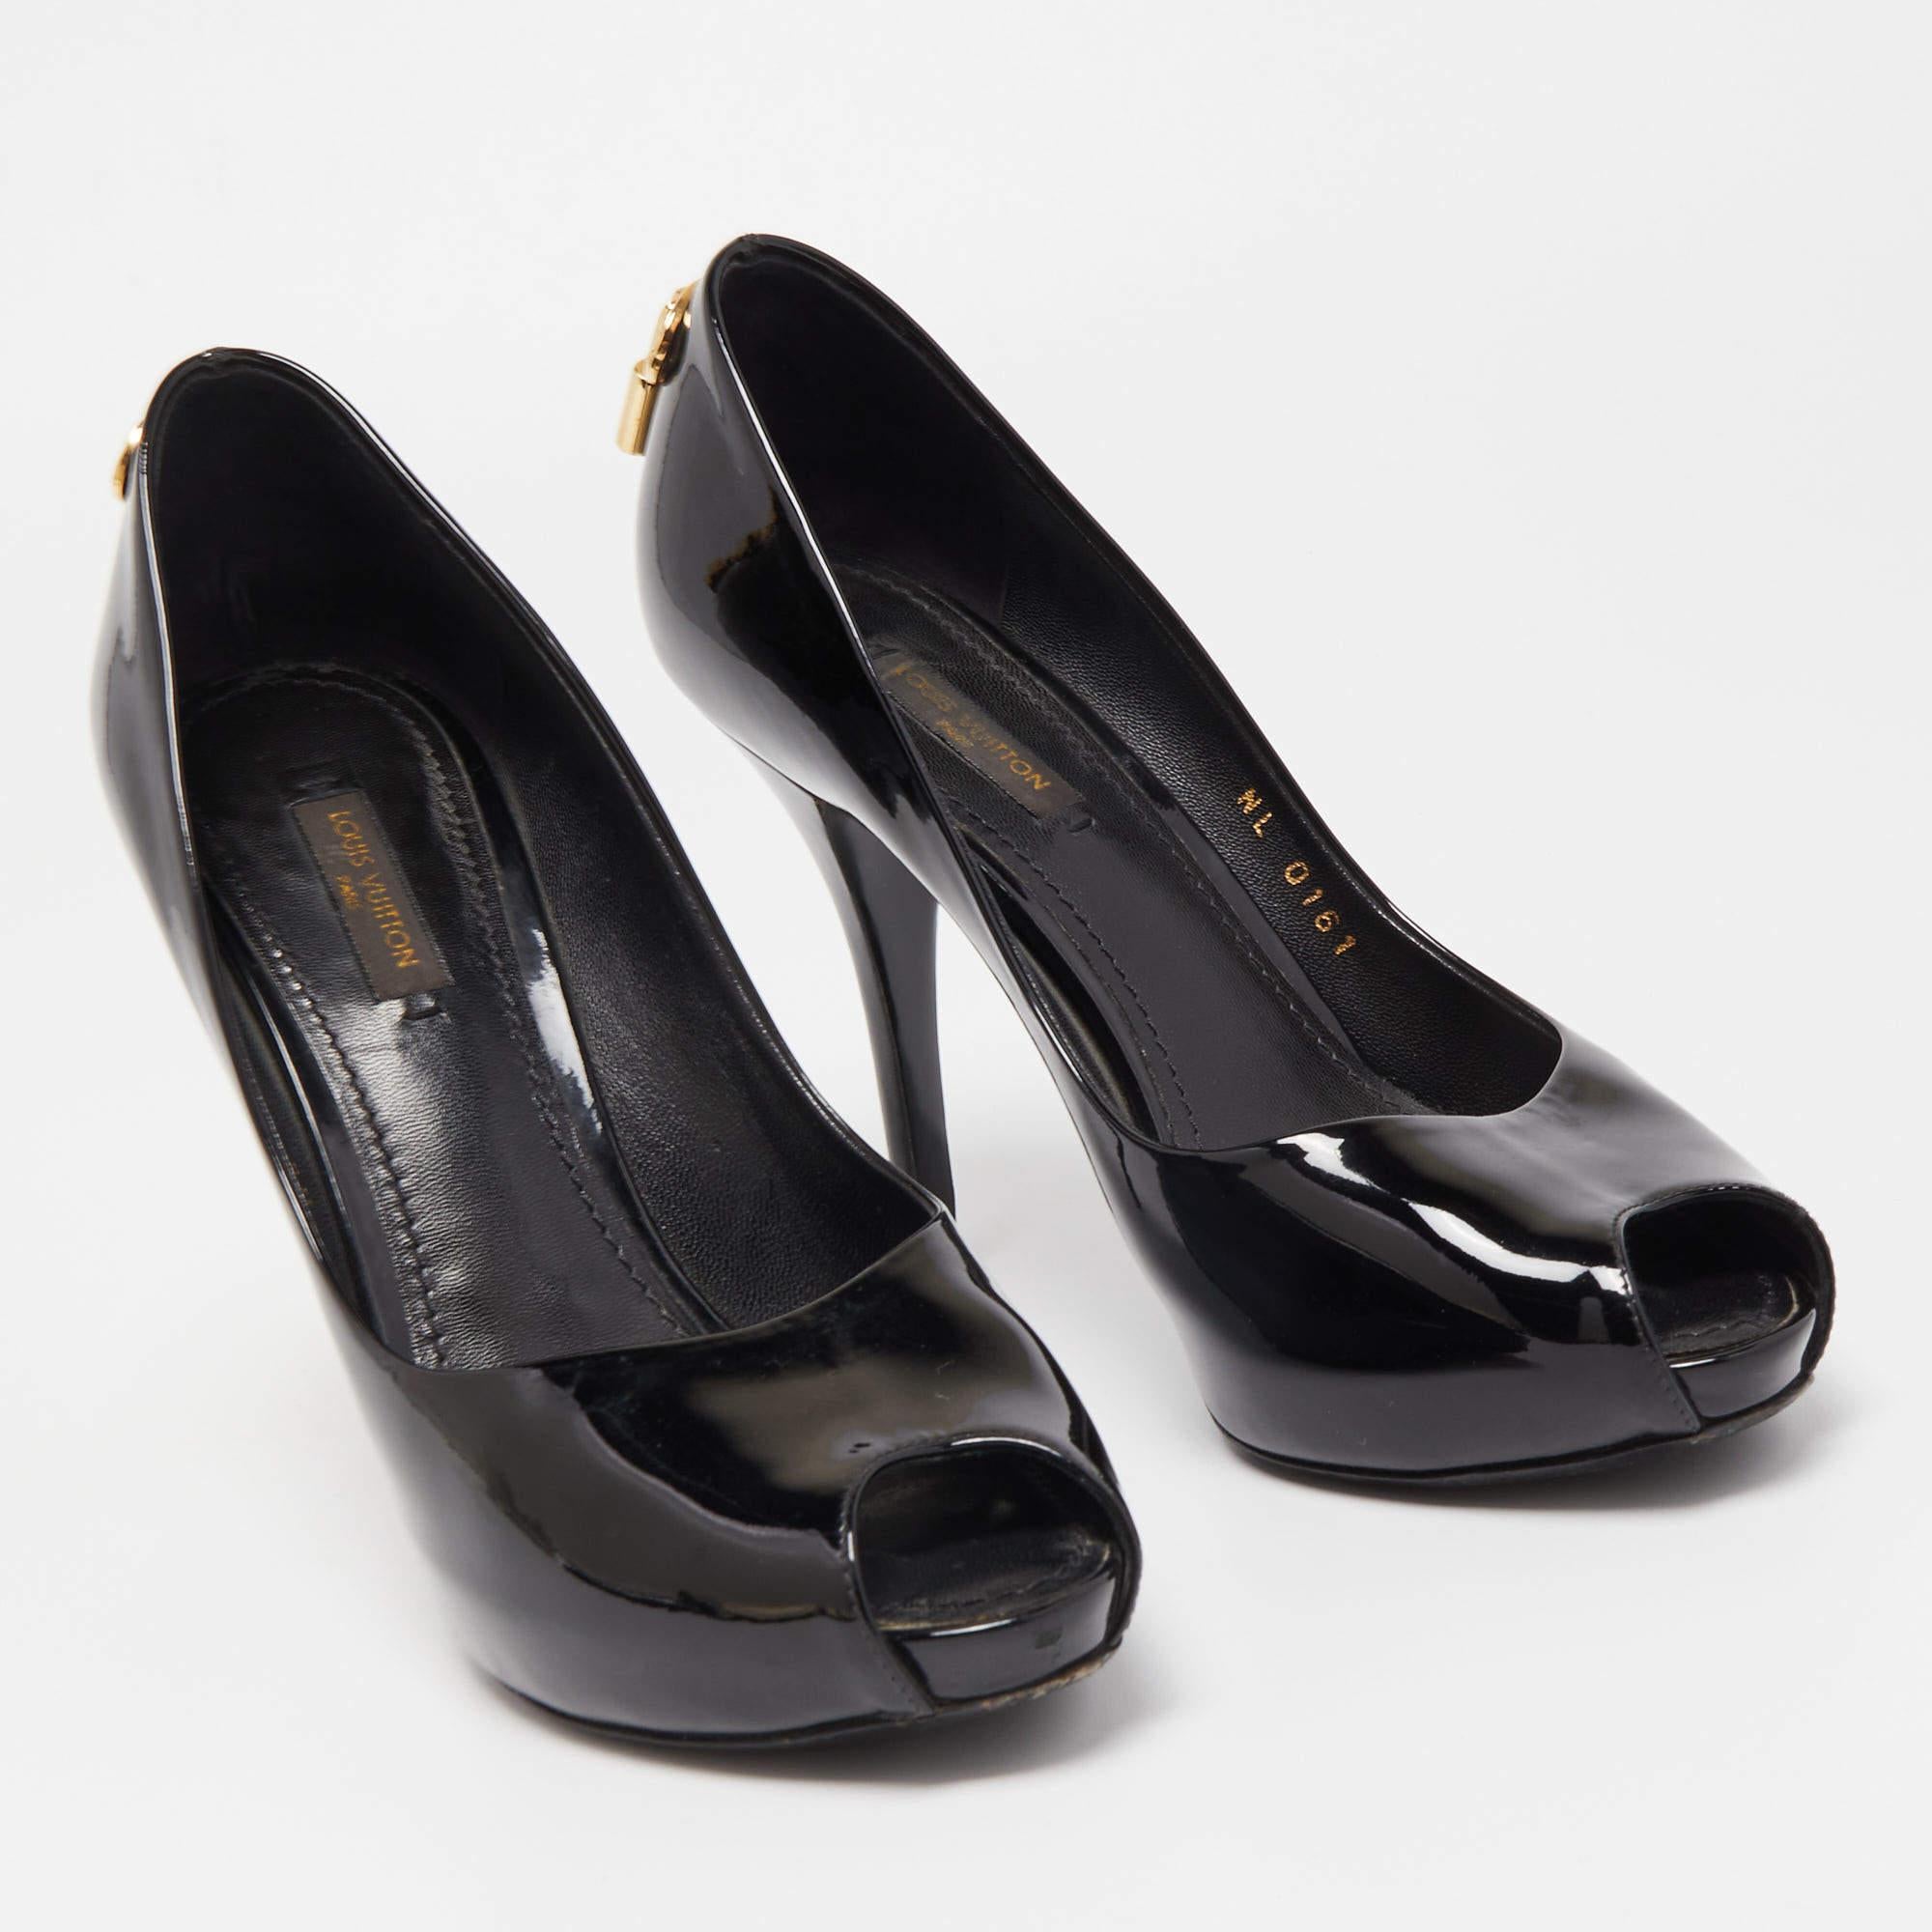 Cut into a timeless silhouette, this pair of pumps is simple yet classy. With a classy shade,, it flaunts durable soles and comfortable footbeds.

